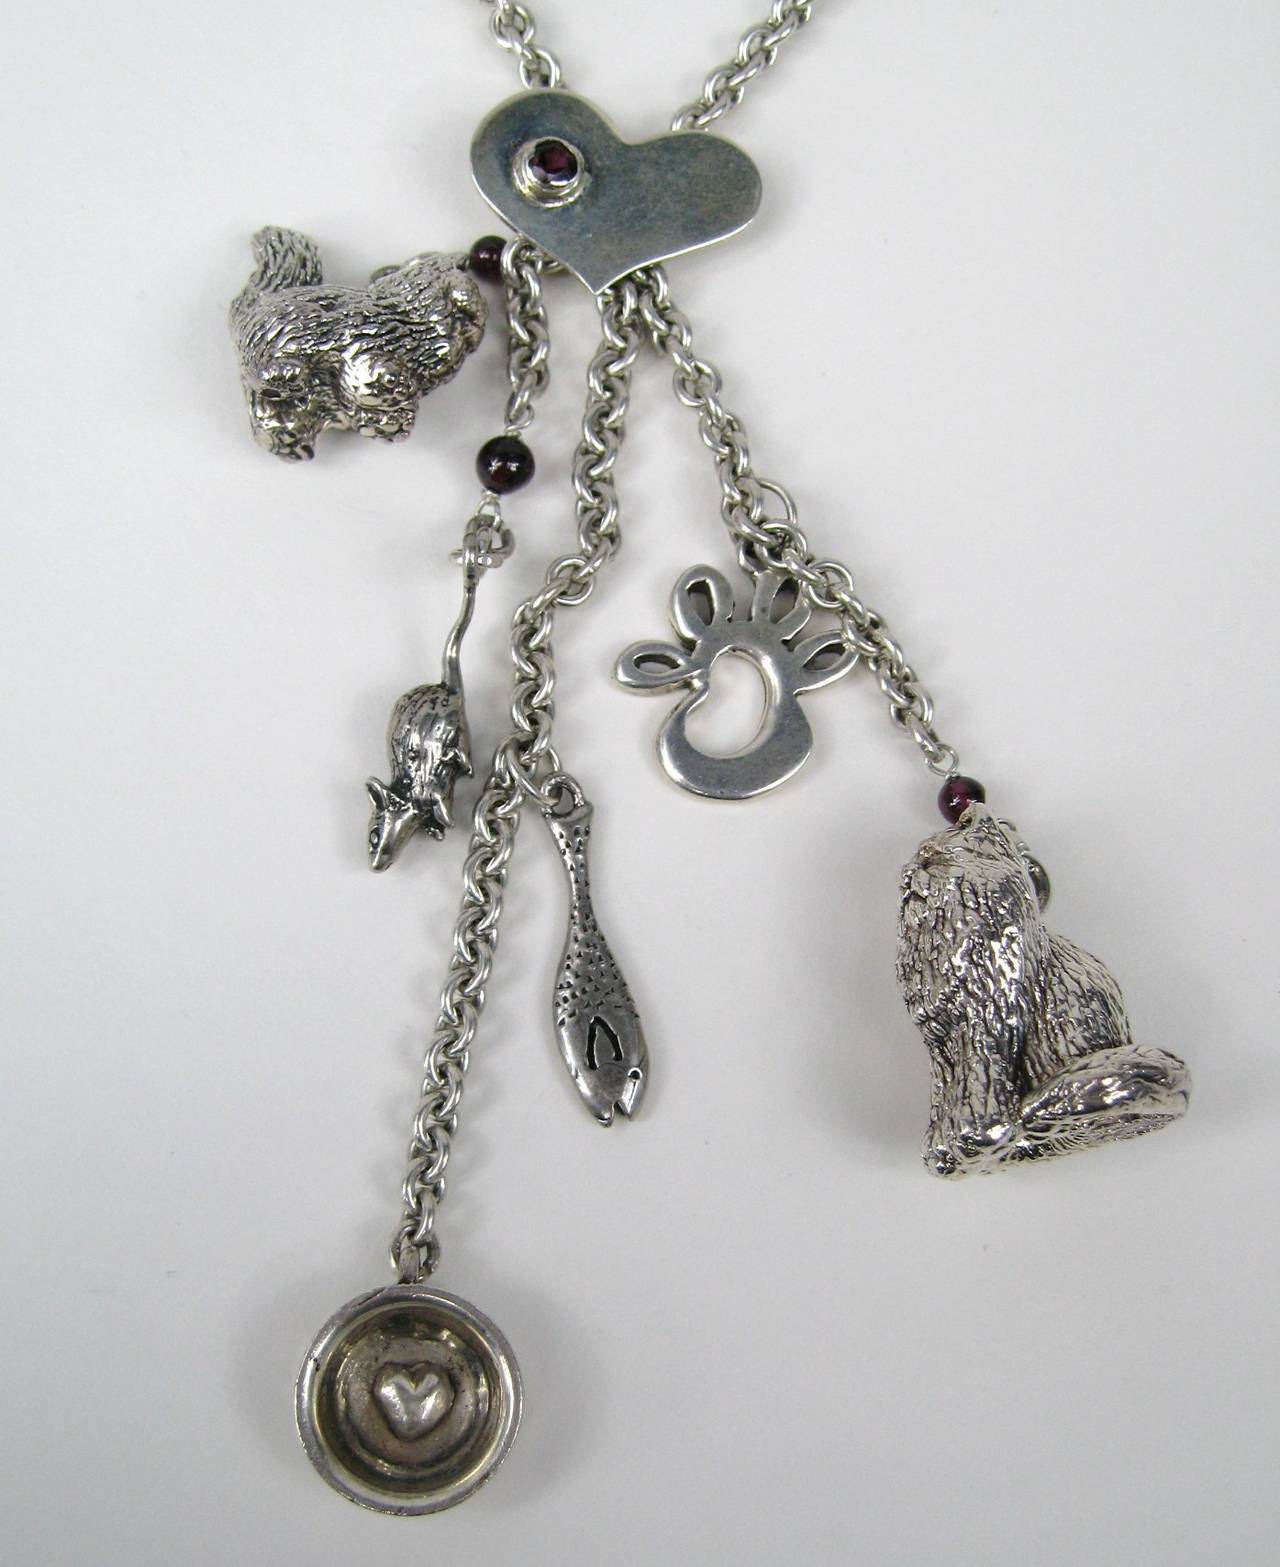 This is adorable
Charms- 2 Large cats, a fish, a mouse, a food dish, Paw, and a 